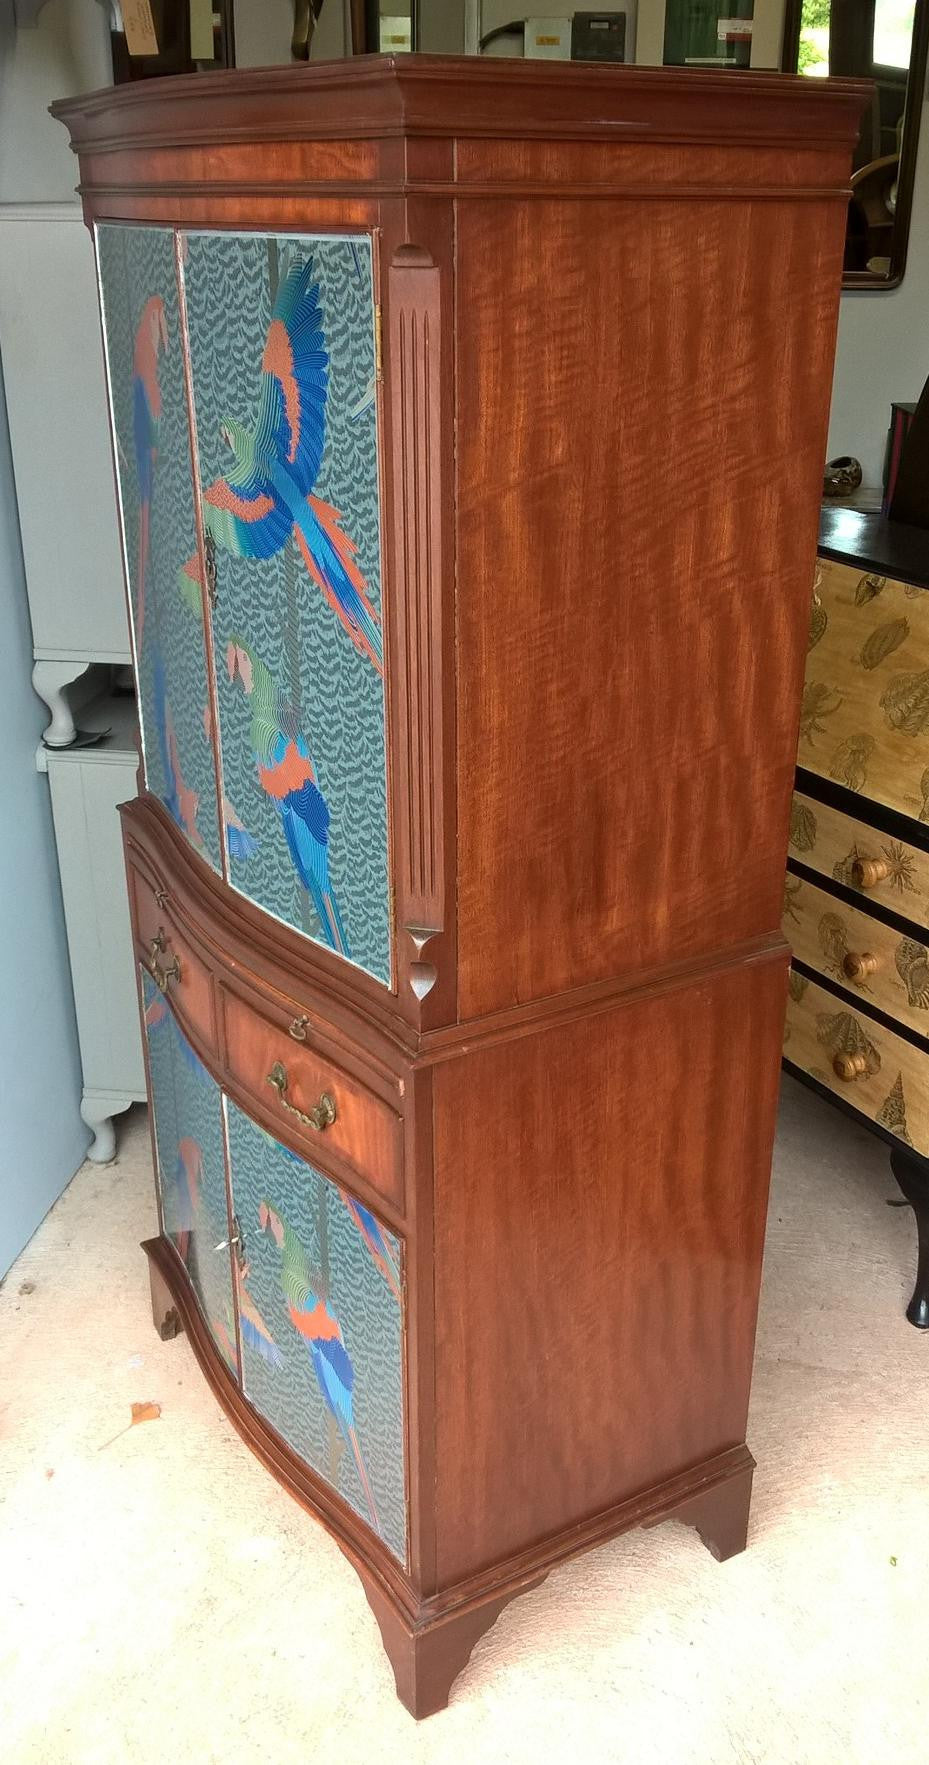 Stunning Vintage Mahogany Drinks Cabinet - Made By Bevan Funnell